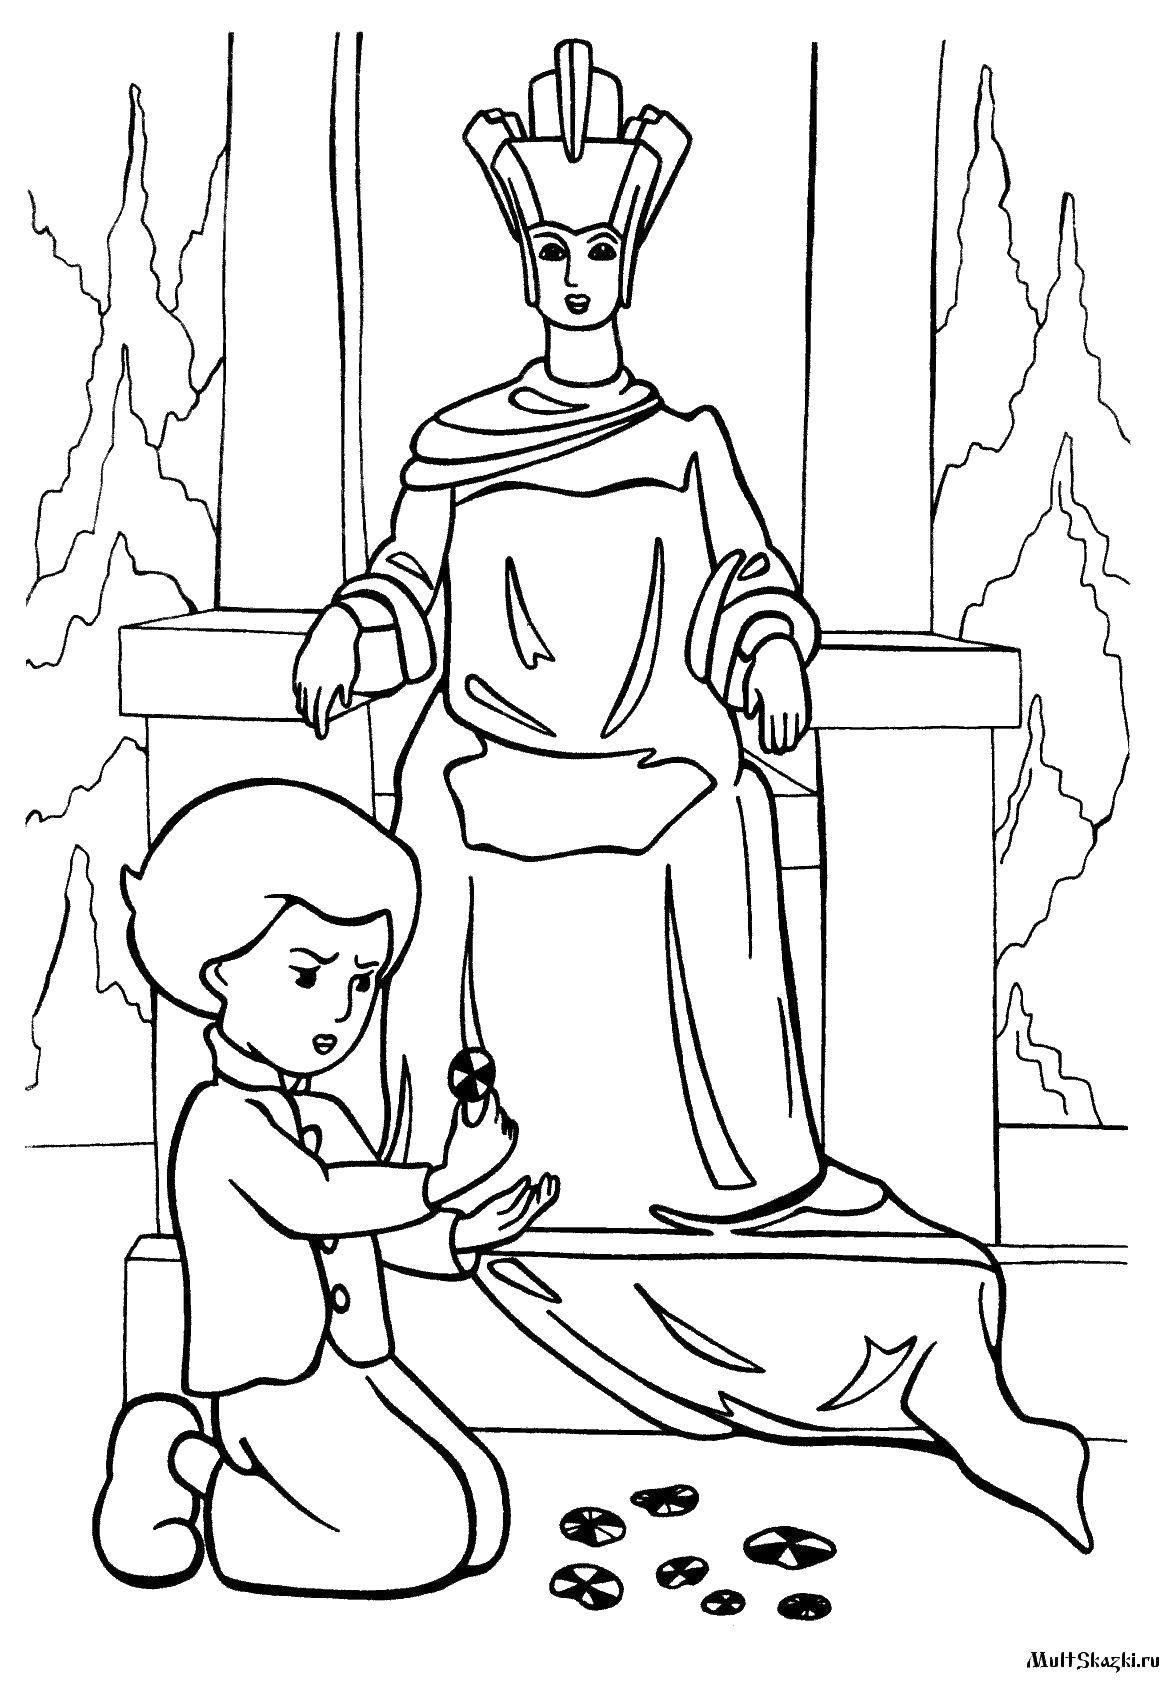 Coloring Kai and the snow Queen on the throne. Category Fairy tales. Tags:  Fairy tales.